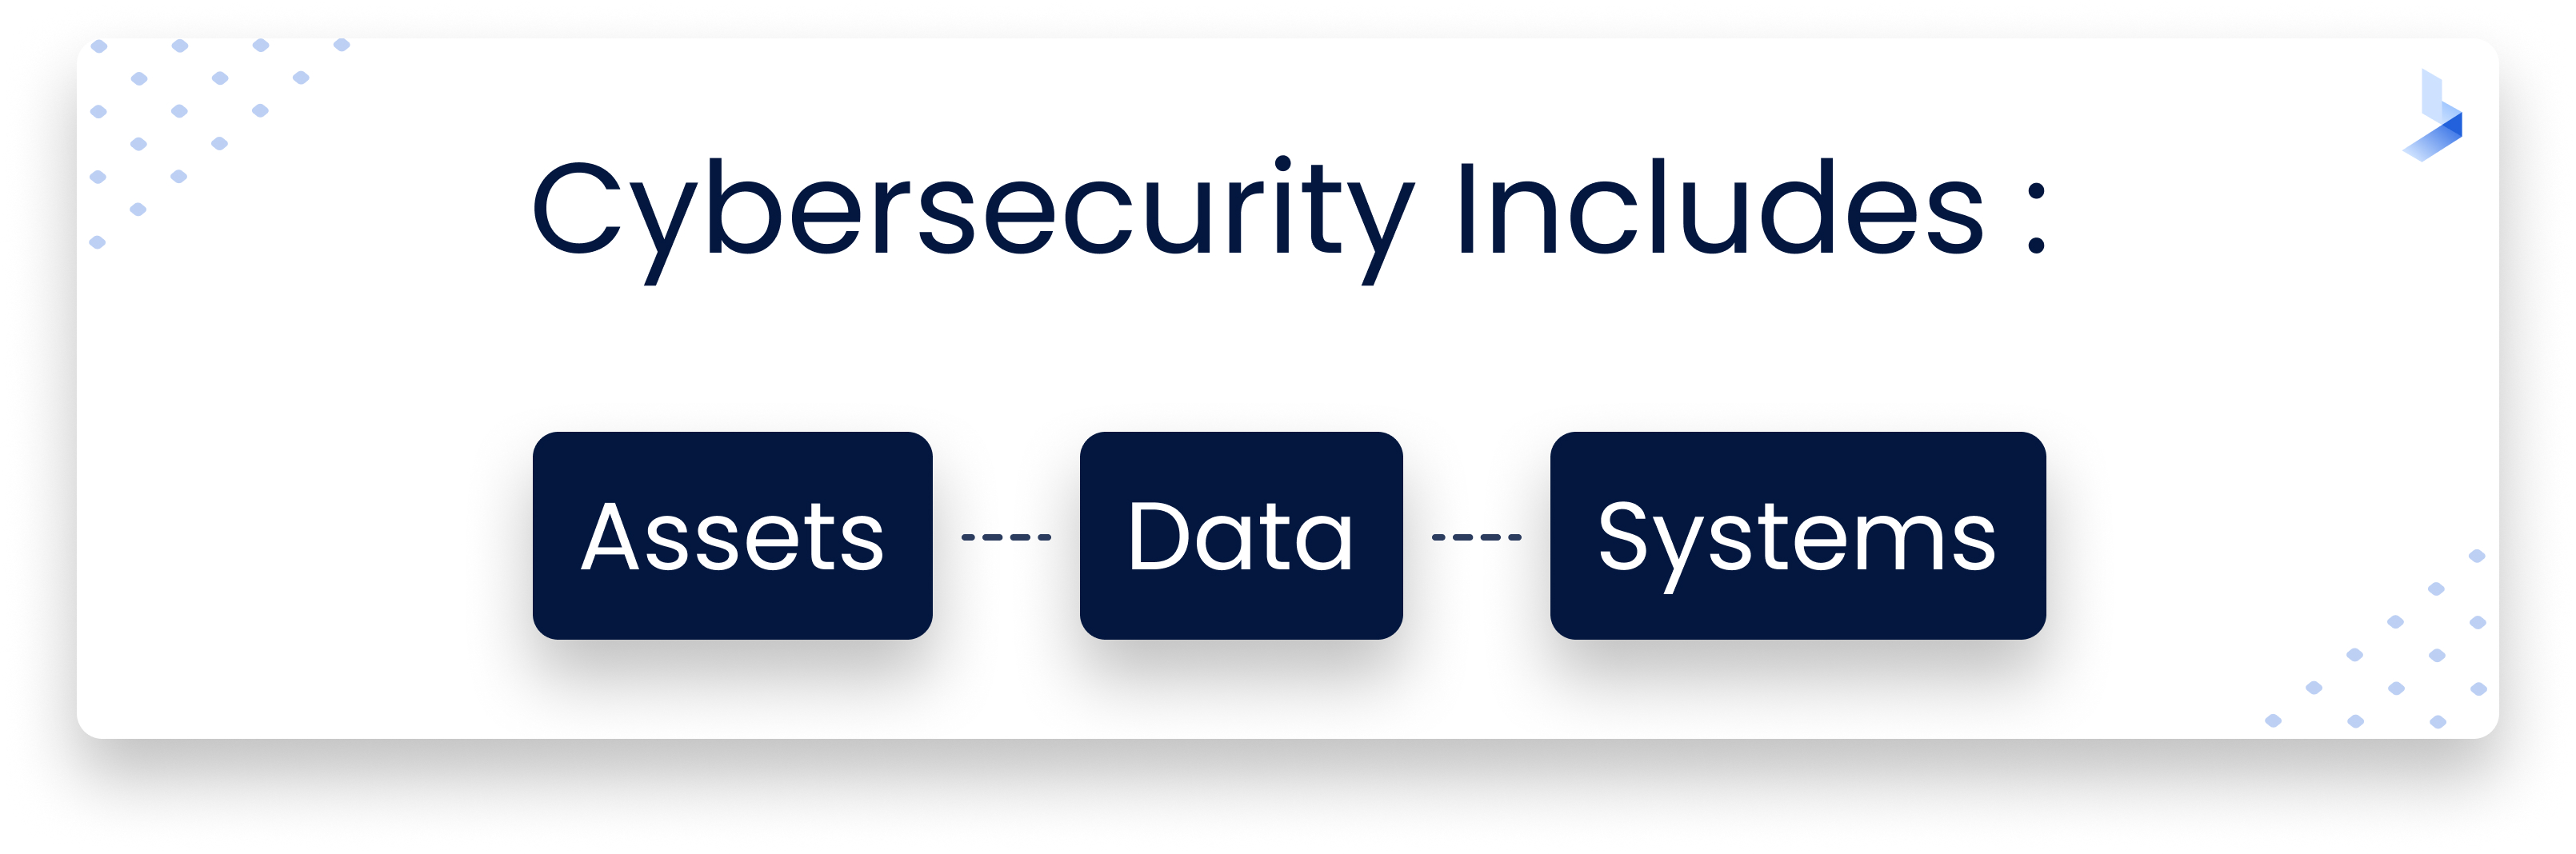 Cybersecurity_Includes_